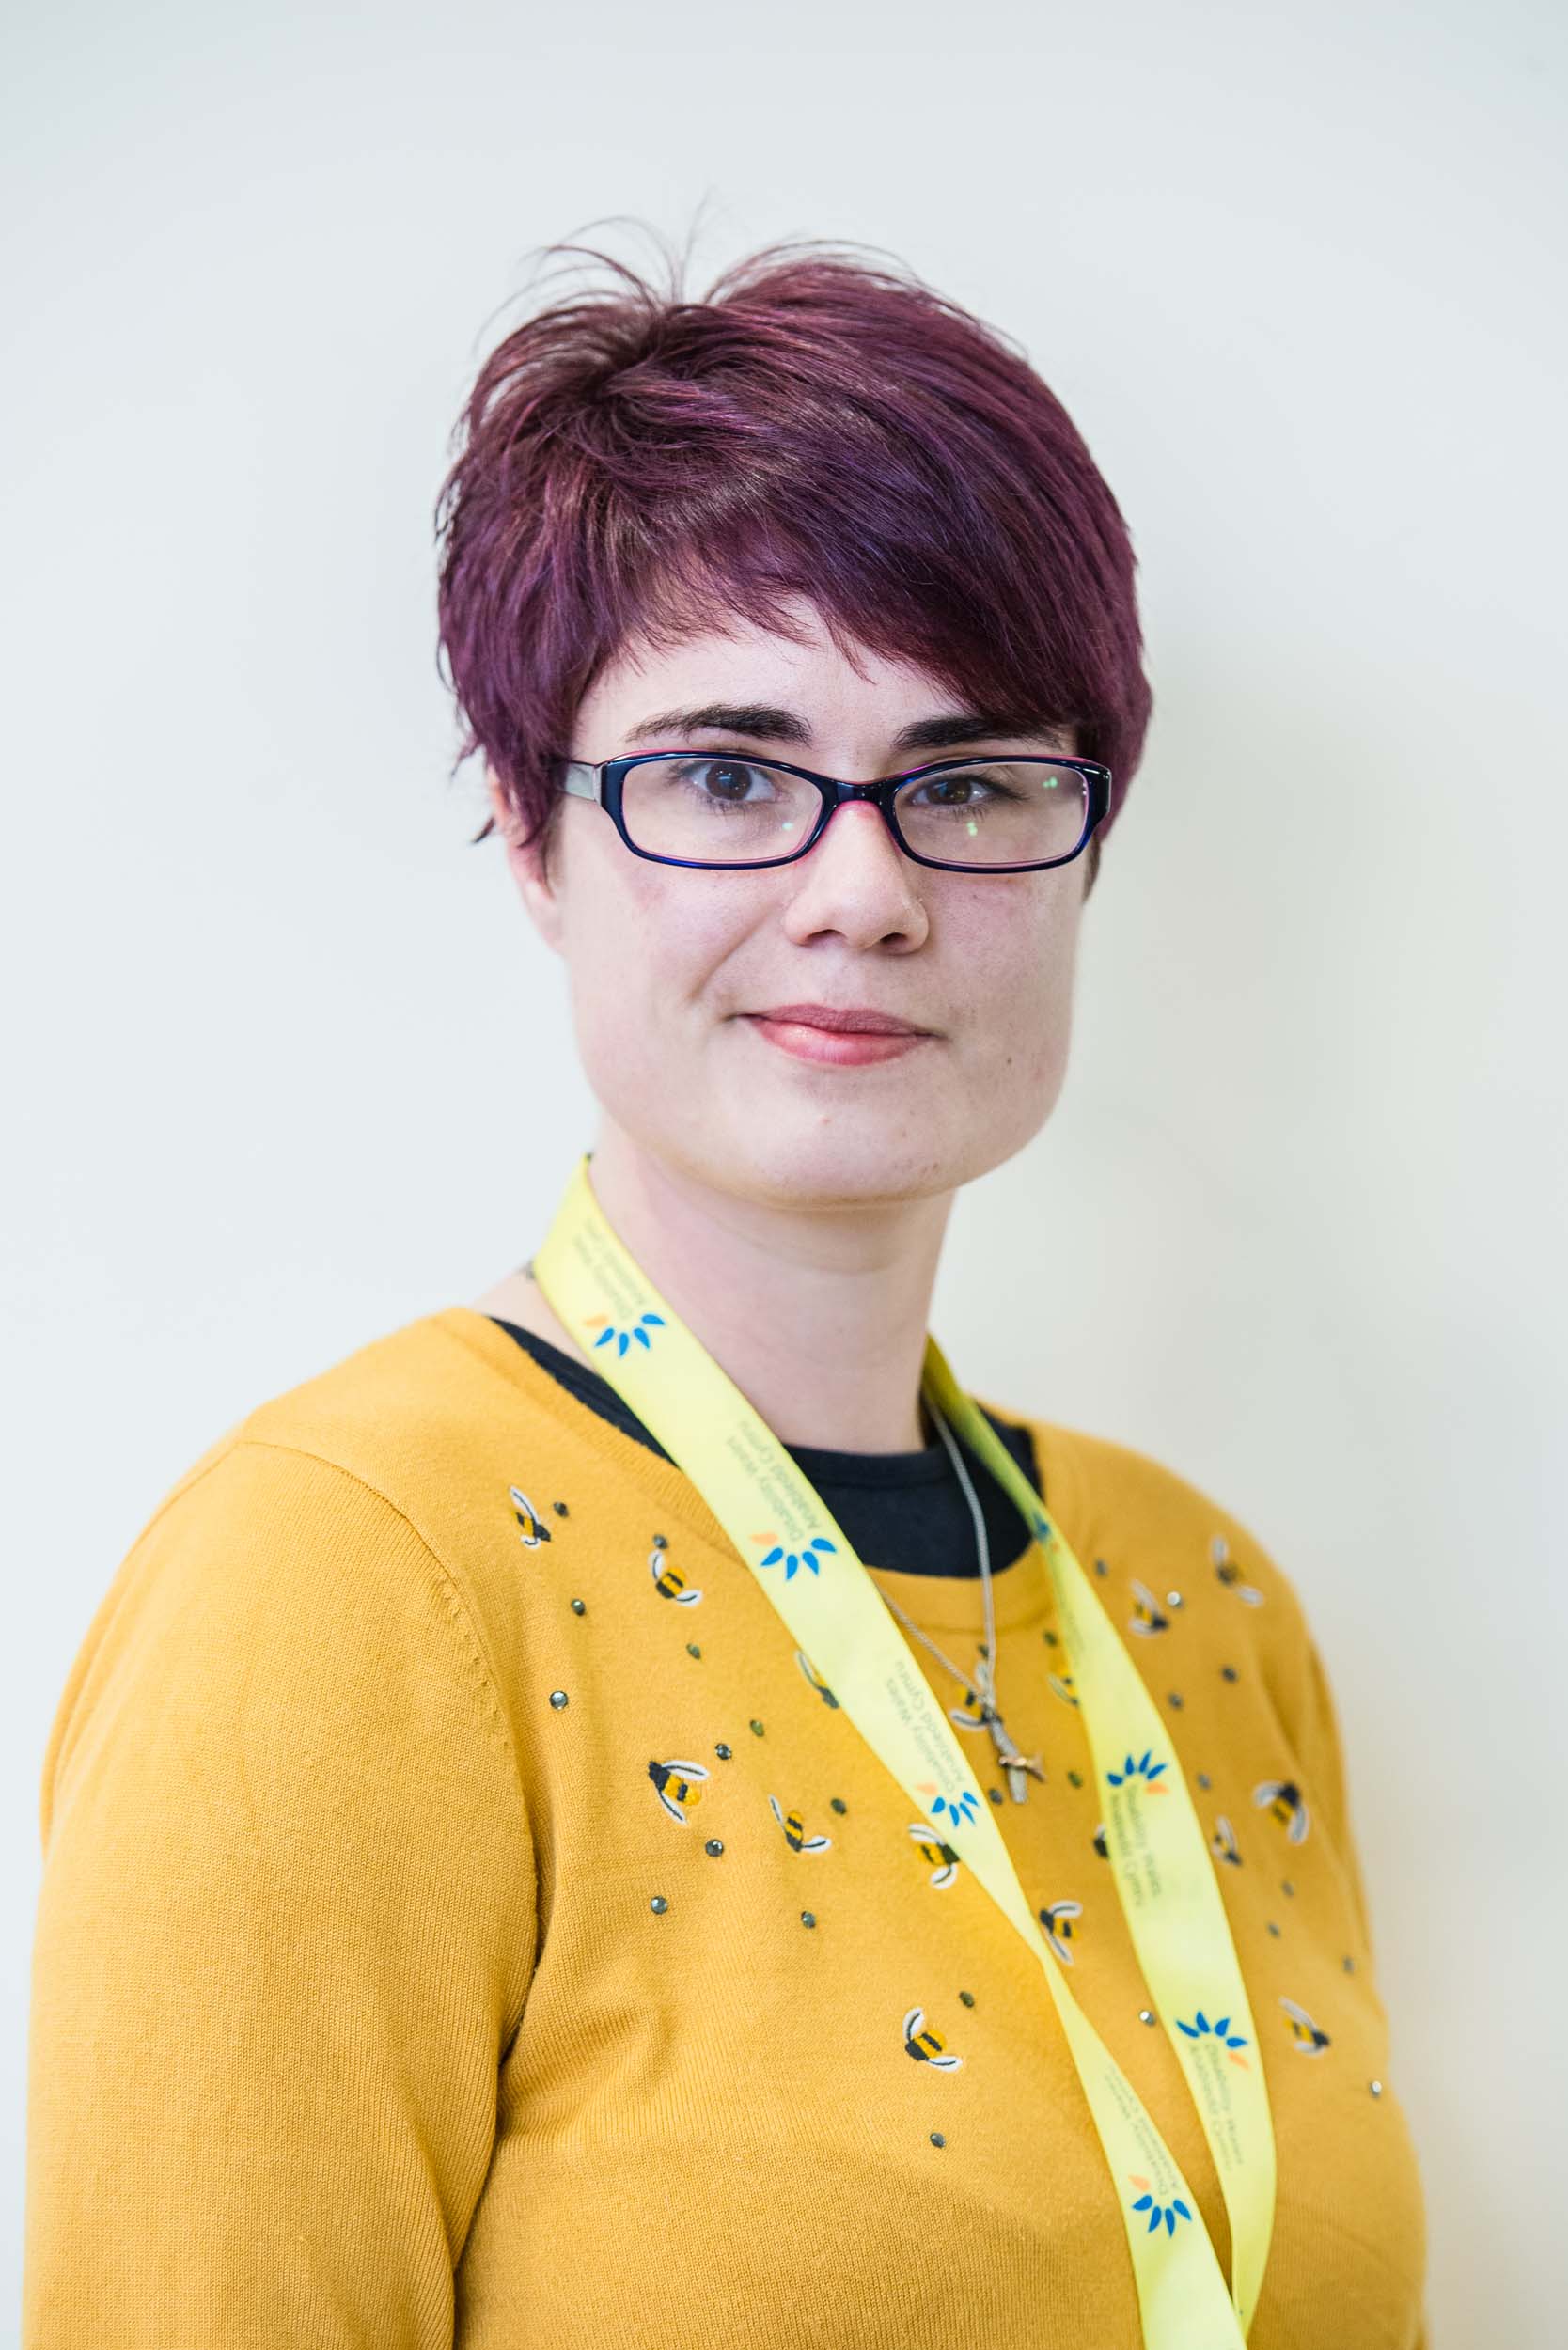 Alex Osborne standing in front of a white wall. She has short purple hair and wears a bright yellow jumper. A DW lanyard is worn around her neck.